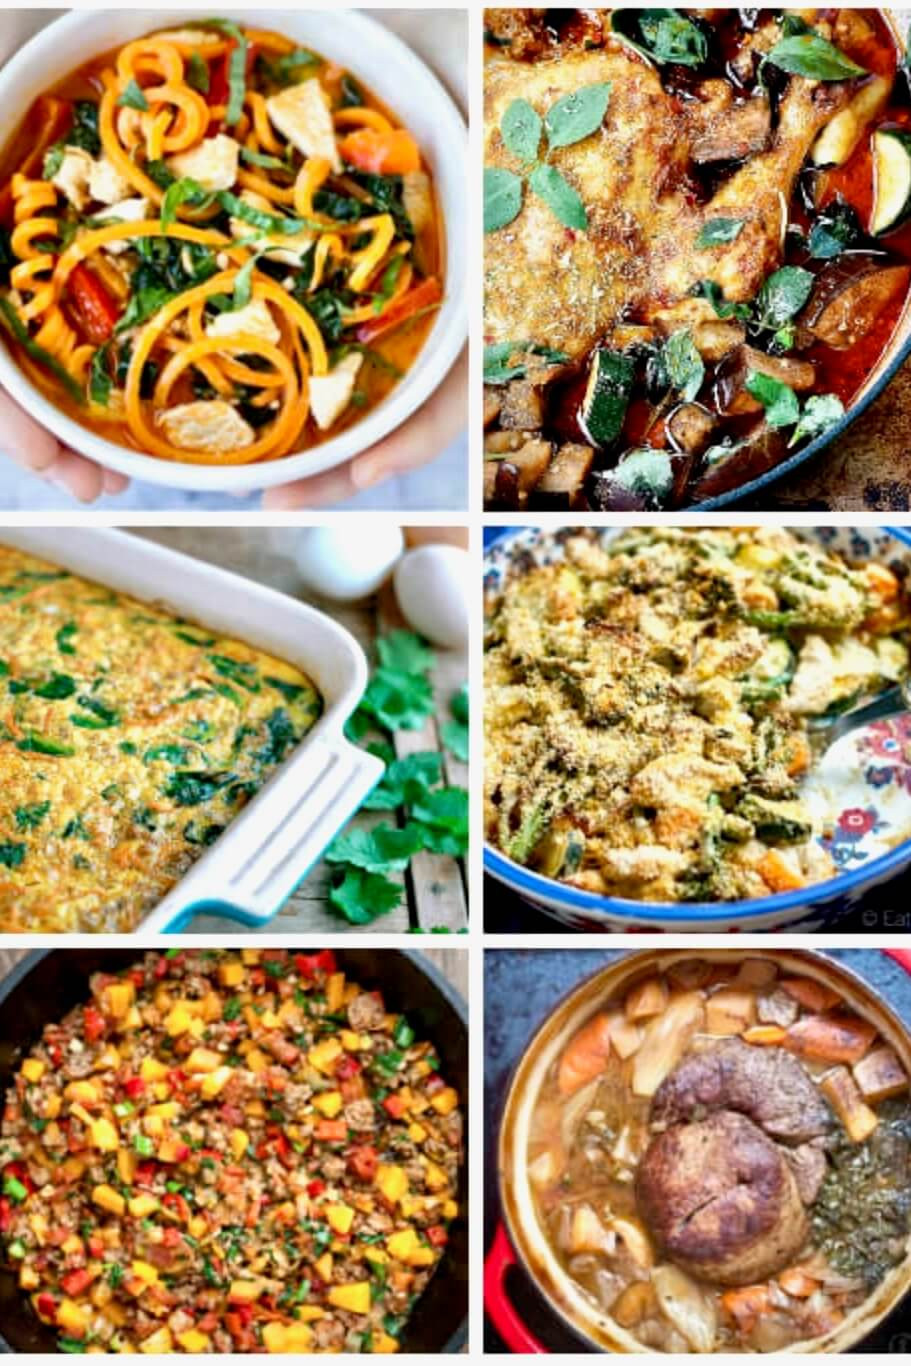 Healthy One Pot Dinners Awesome 40 Healthy E Pot Meals Gluten Free and Paleo Savory